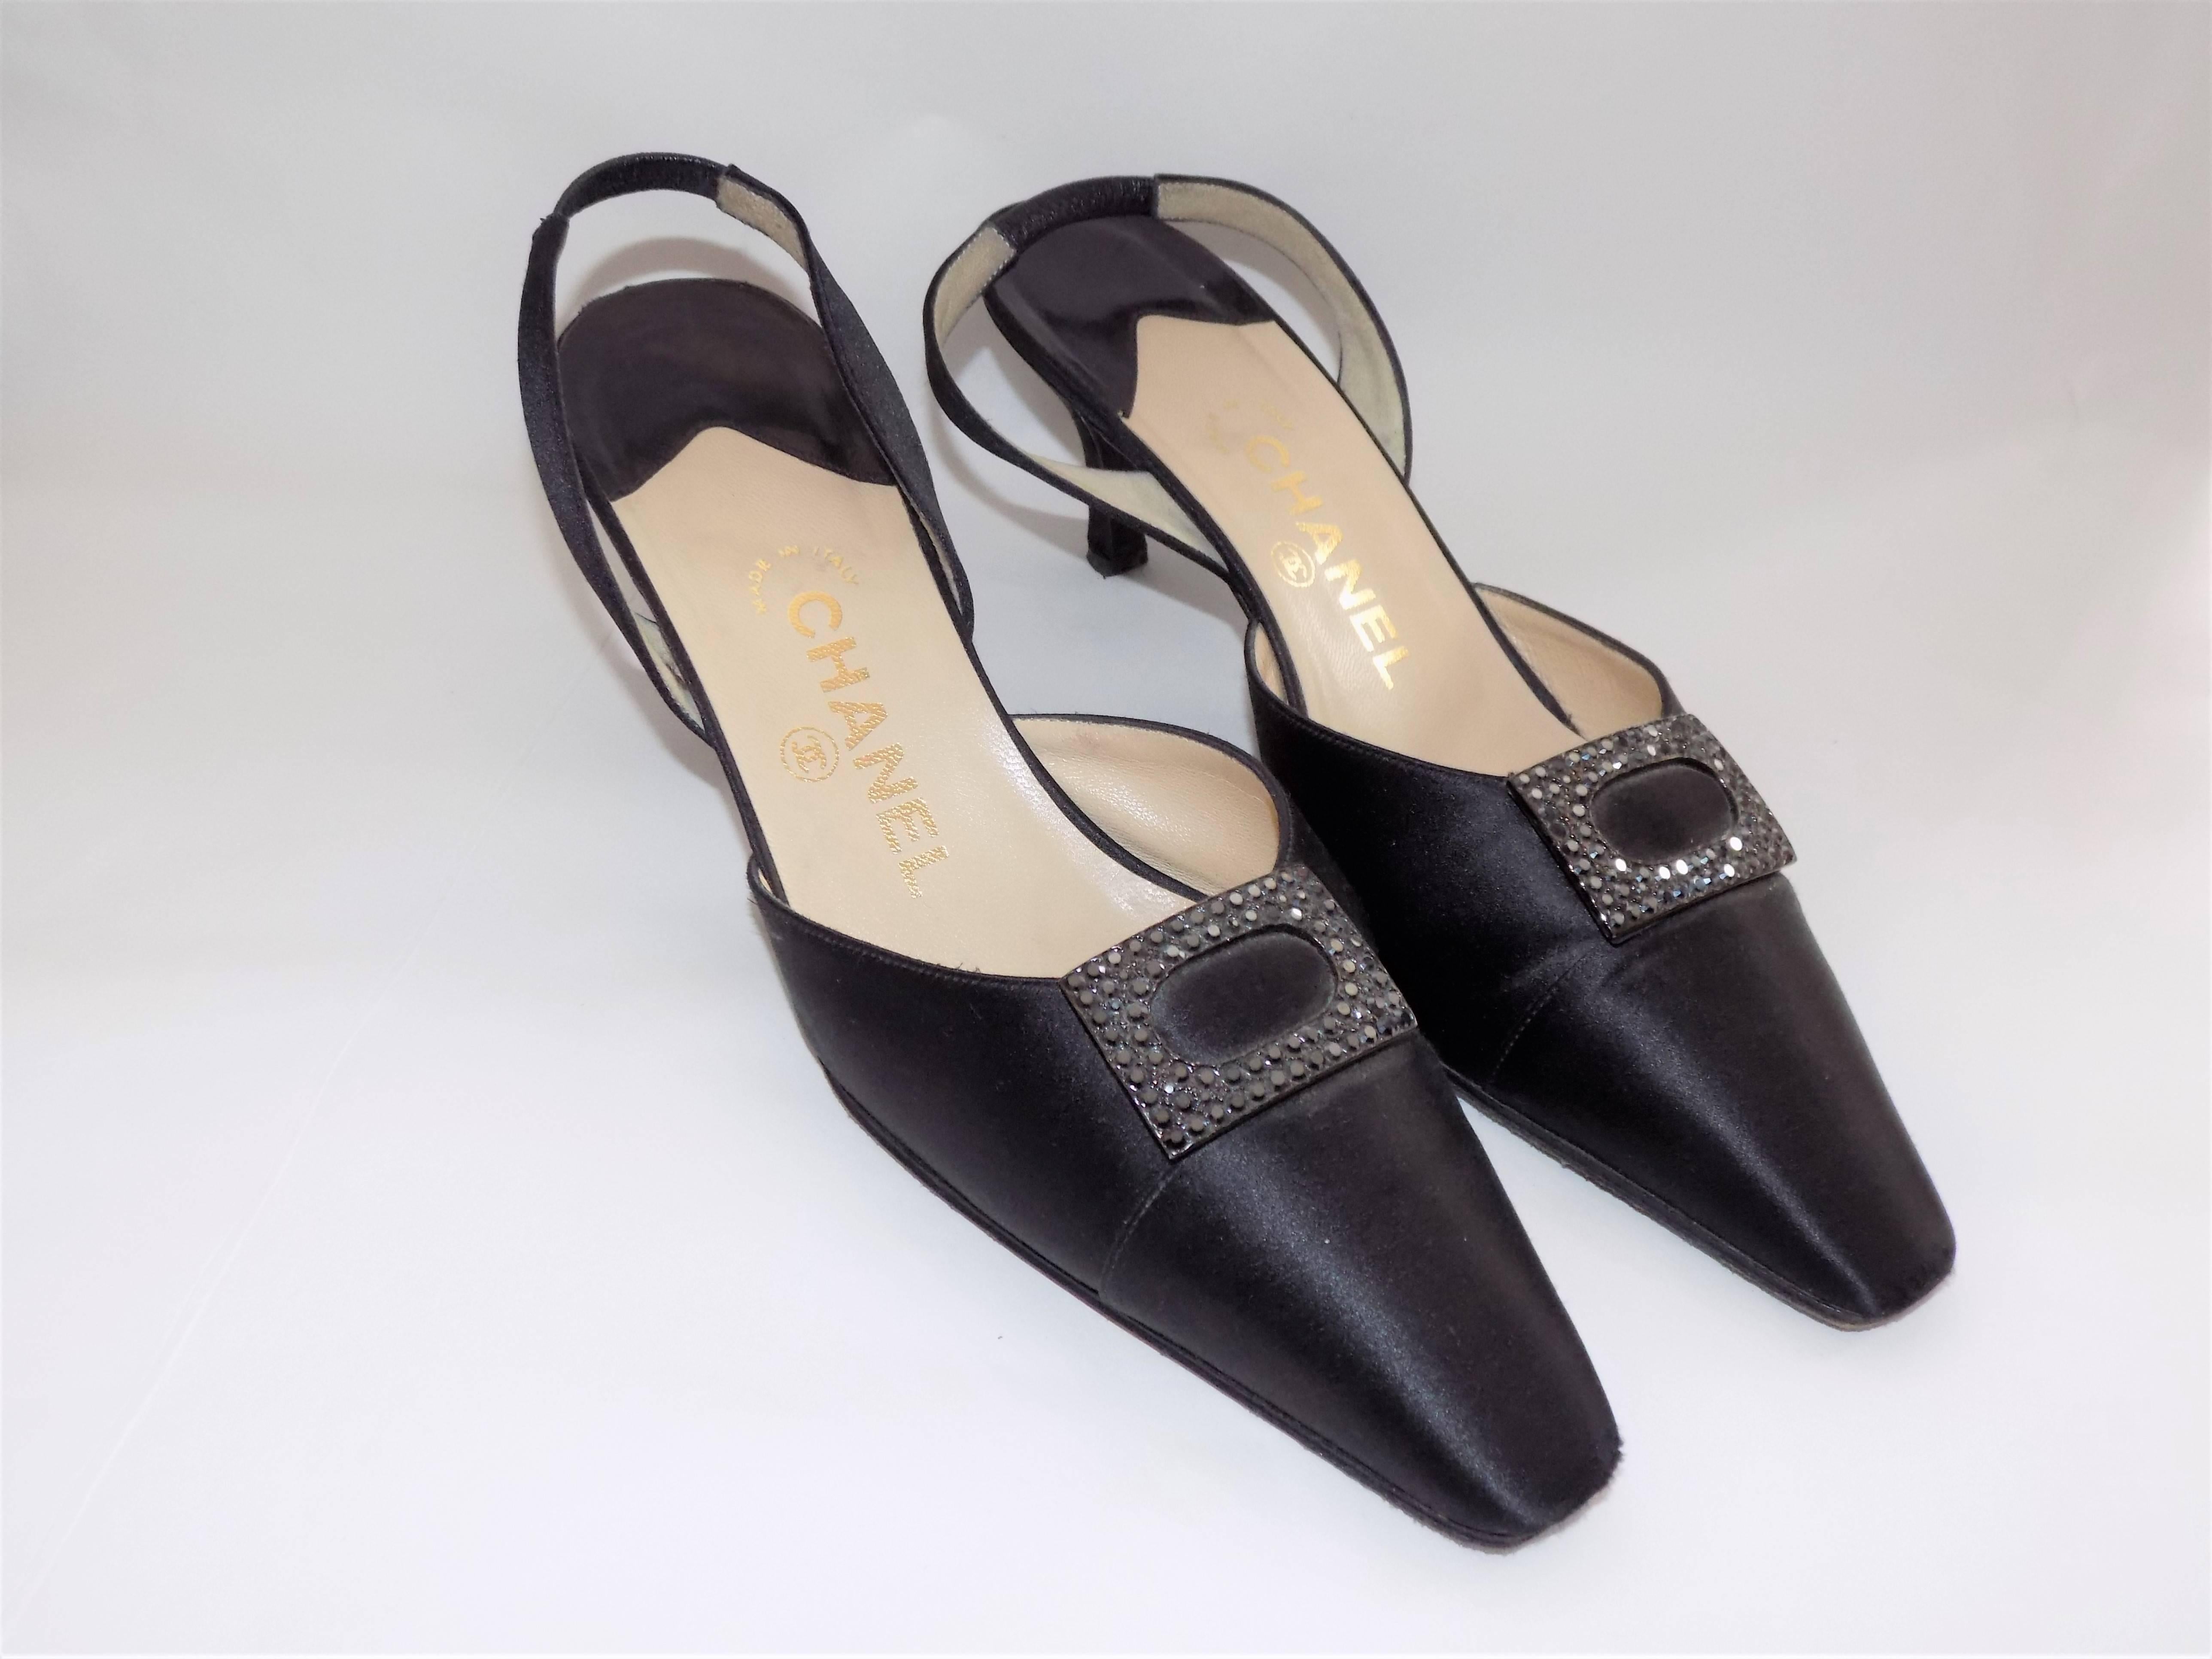 Worn few times in very good condition black Chanel sling back evening shoes. Low heel to keep you comfortable all night and very beautiful front crystal buckle.